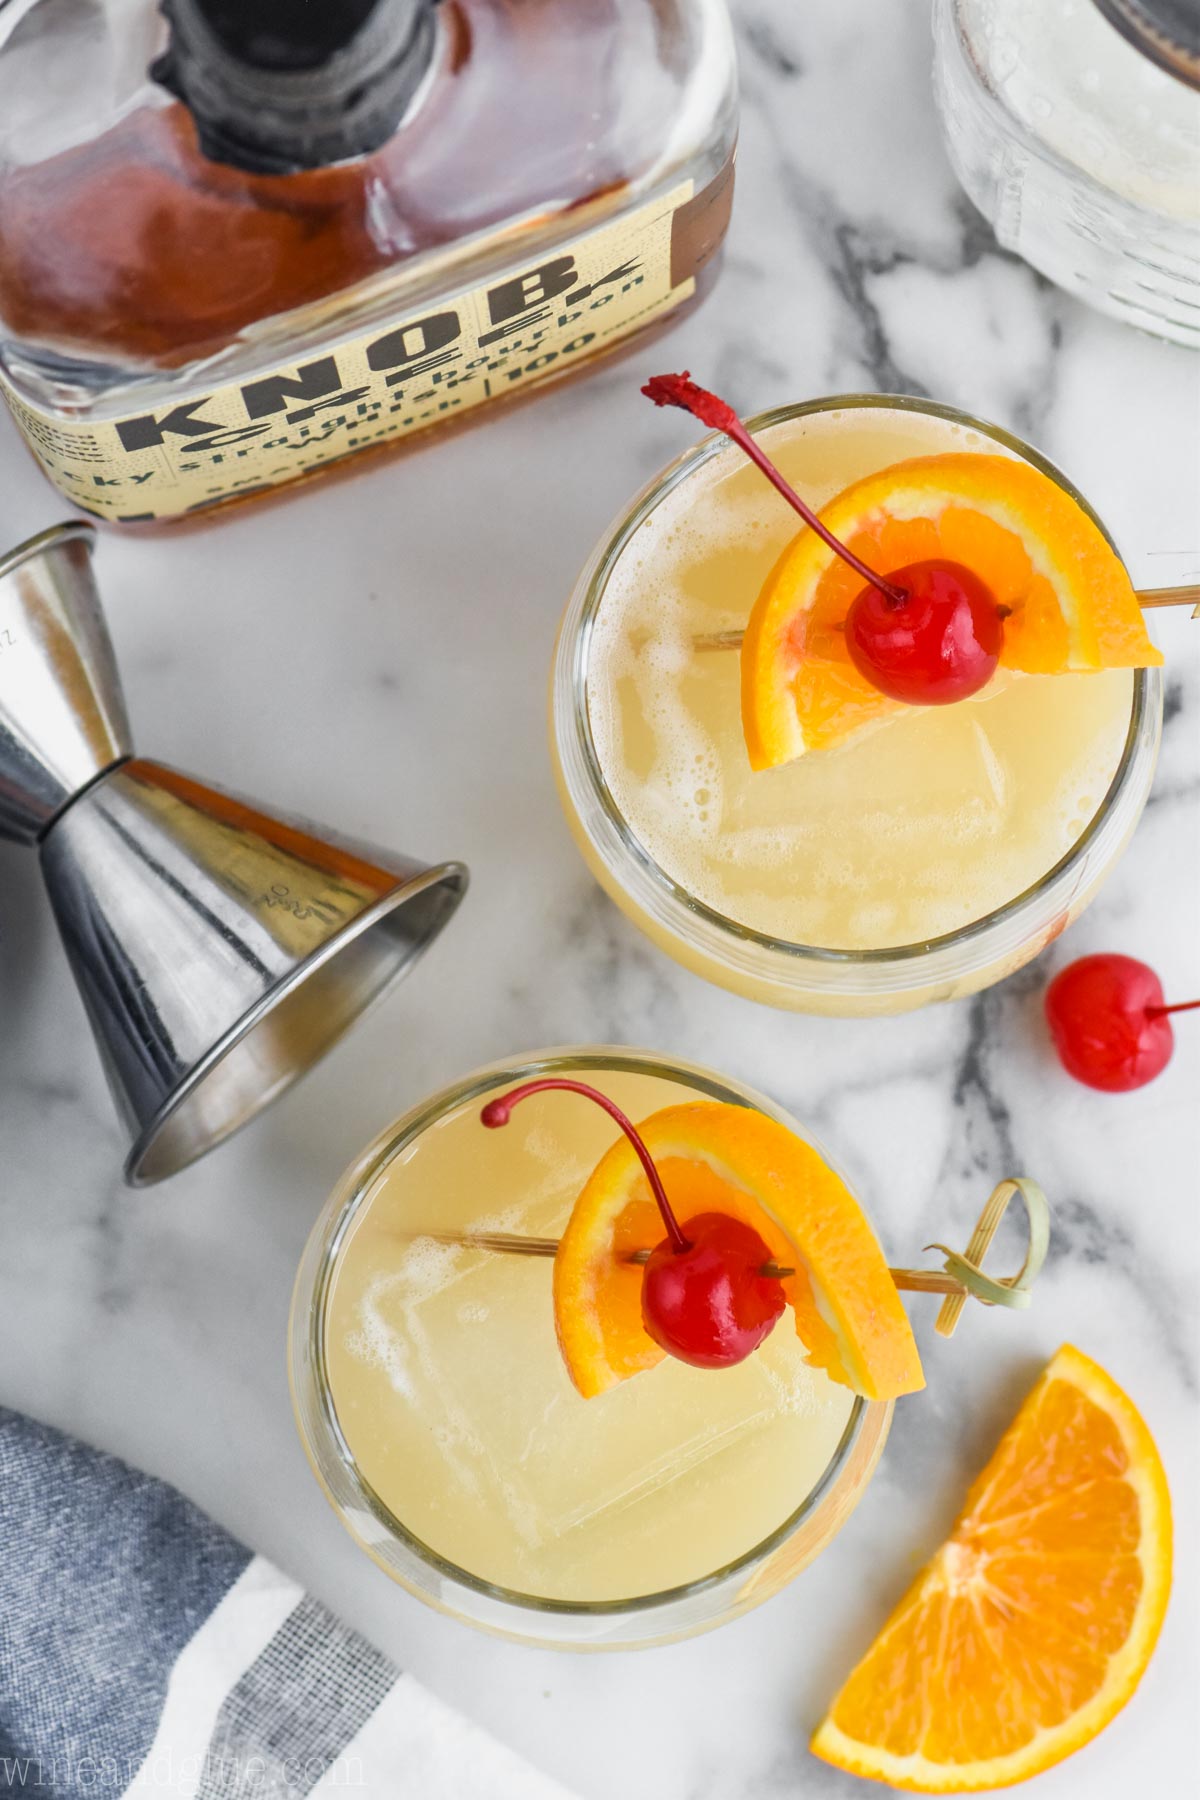 whiskey sour recipe no simple syrup